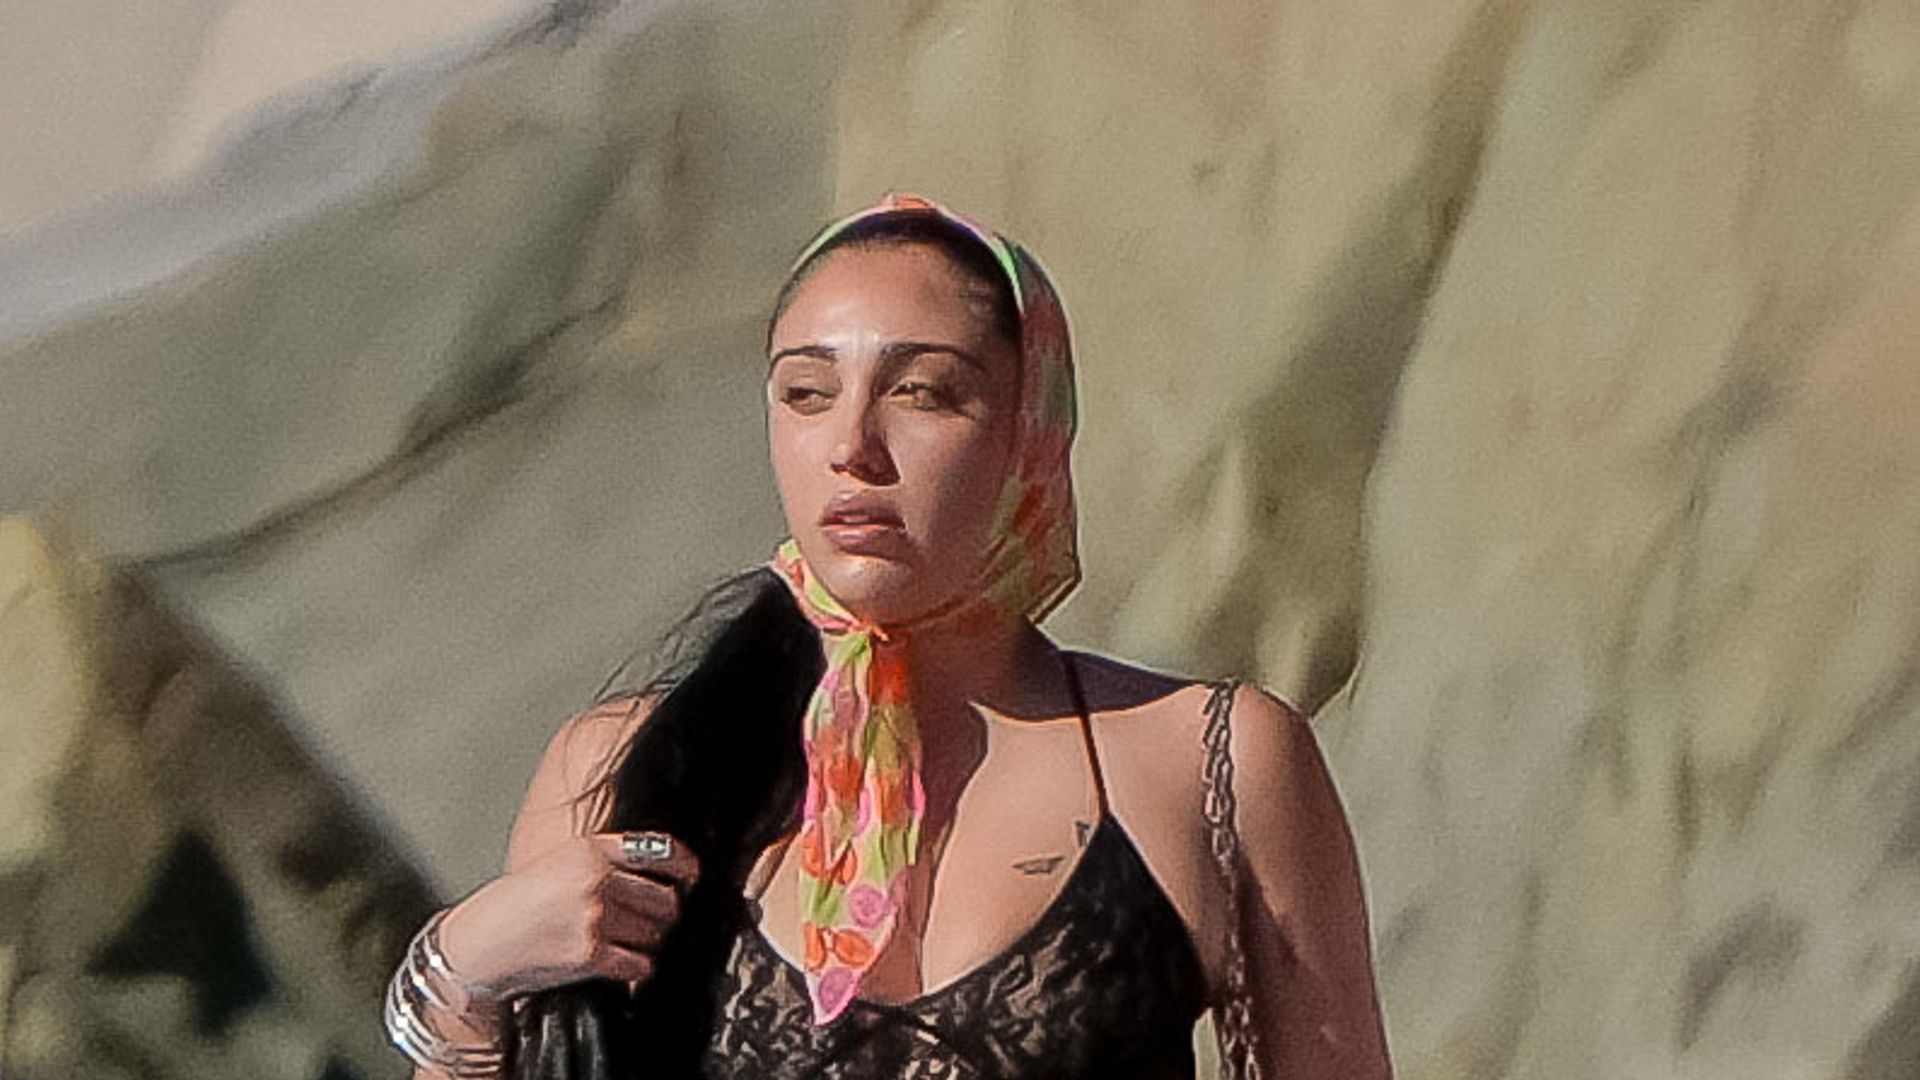 Lourdes Leon stuns in sheer lace catsuit as she arrives in St Barts with Madonna, 65, and brother Rocco Ritchie